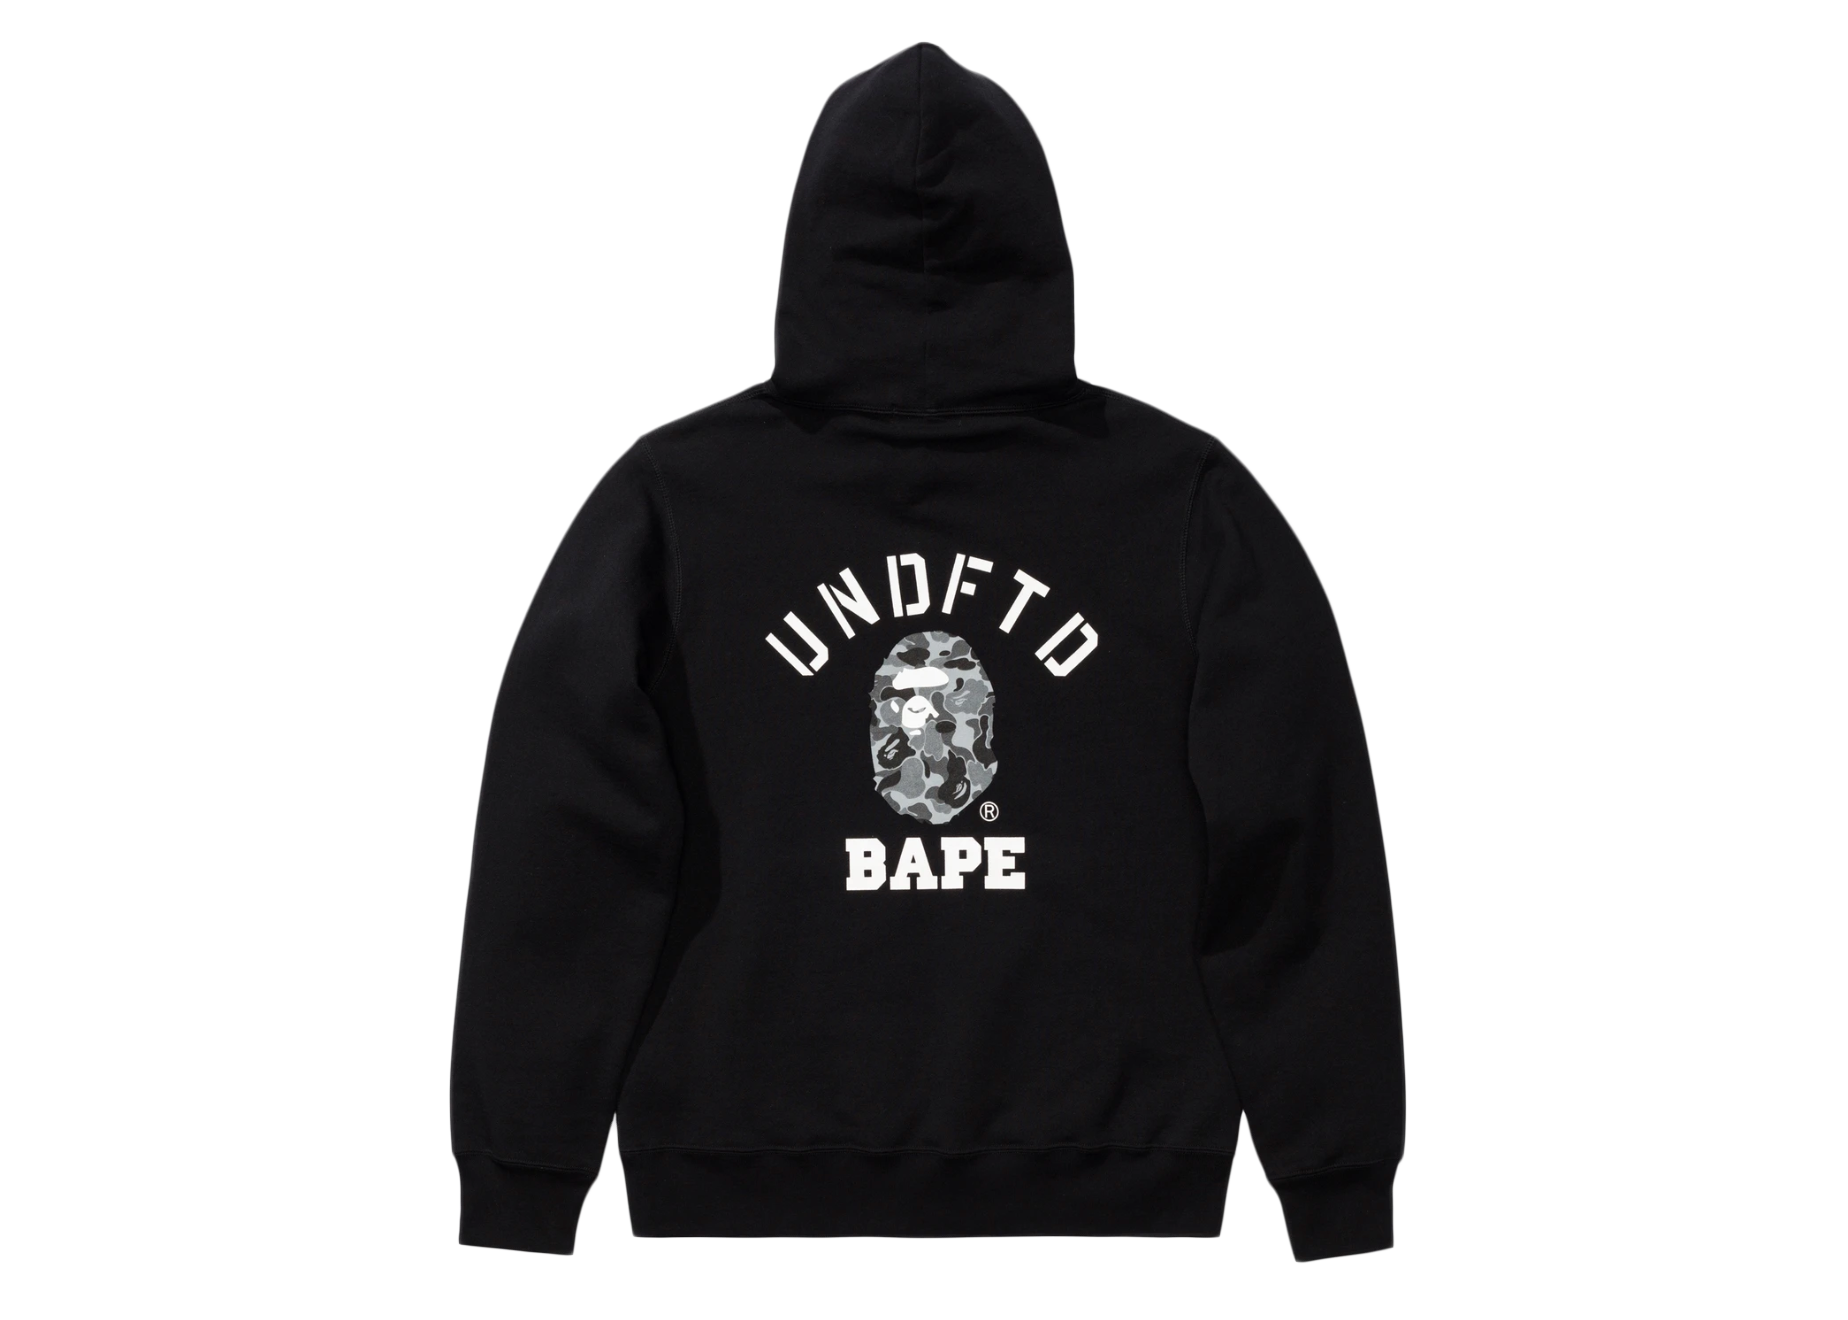 BAPE x Undefeated Pullover Hoodie (White Strings) Black Men's - US